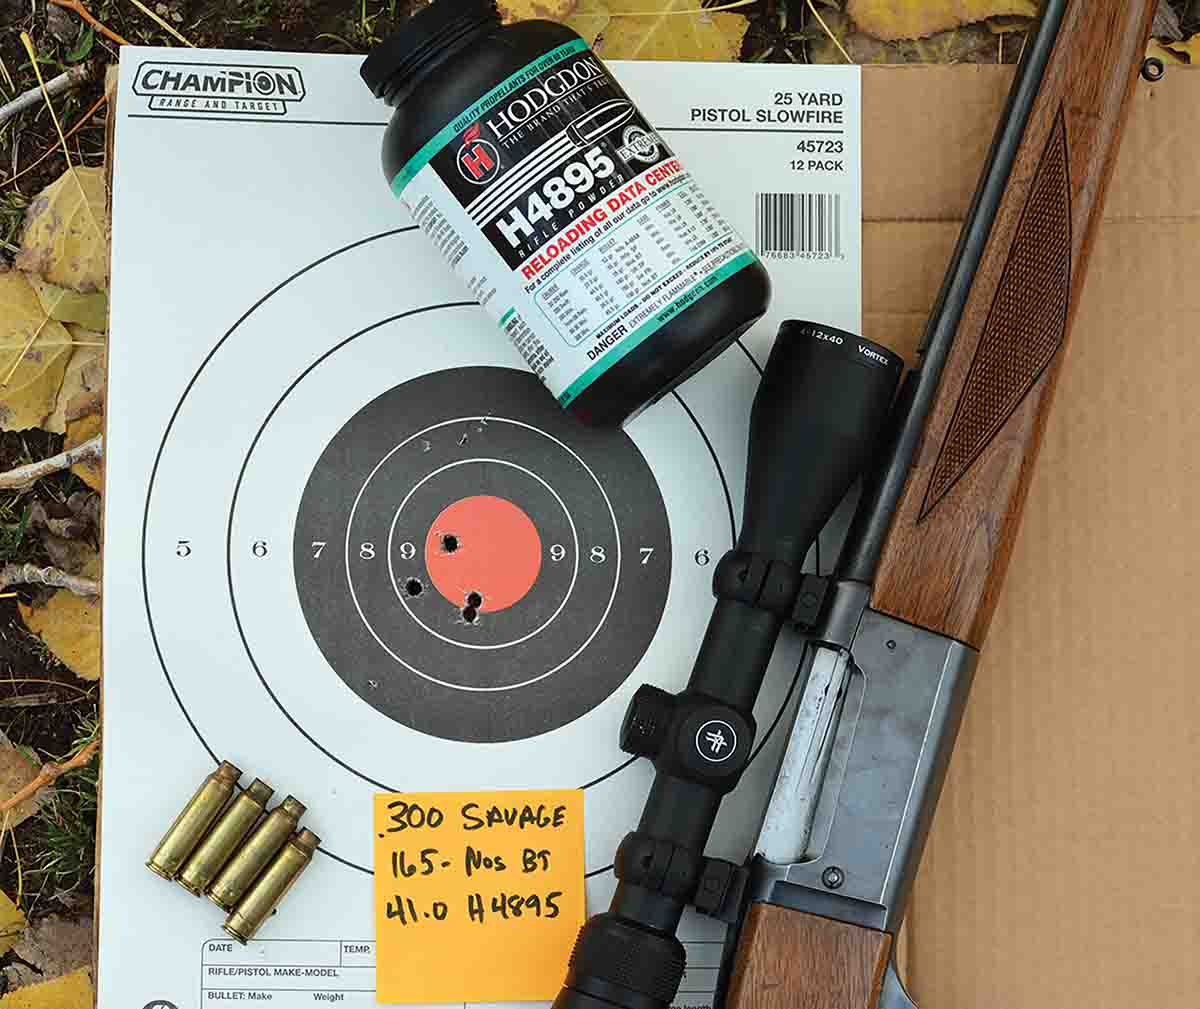 Using Hodgdon H-4895 powder with the Nosler 165-grain Ballistic Tip bullet proved an accurate combination.